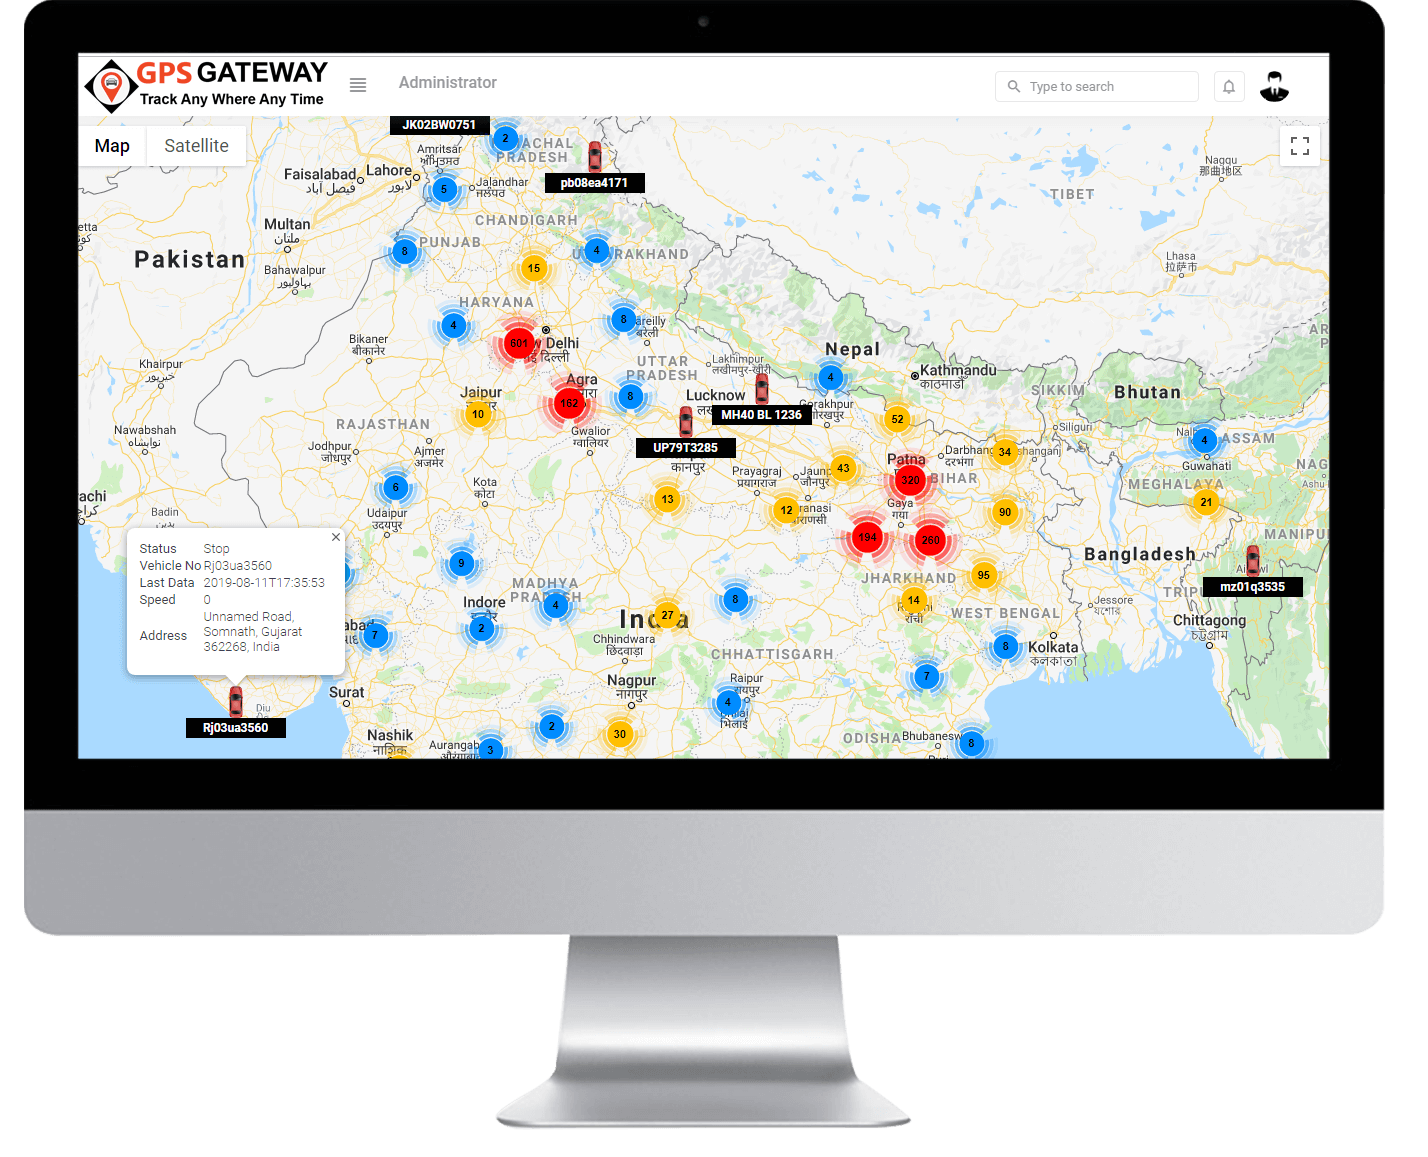  Open Source empoyee tracking software, Application  gps tracking app, Application  gps tracking system, Application  gps tracking app android